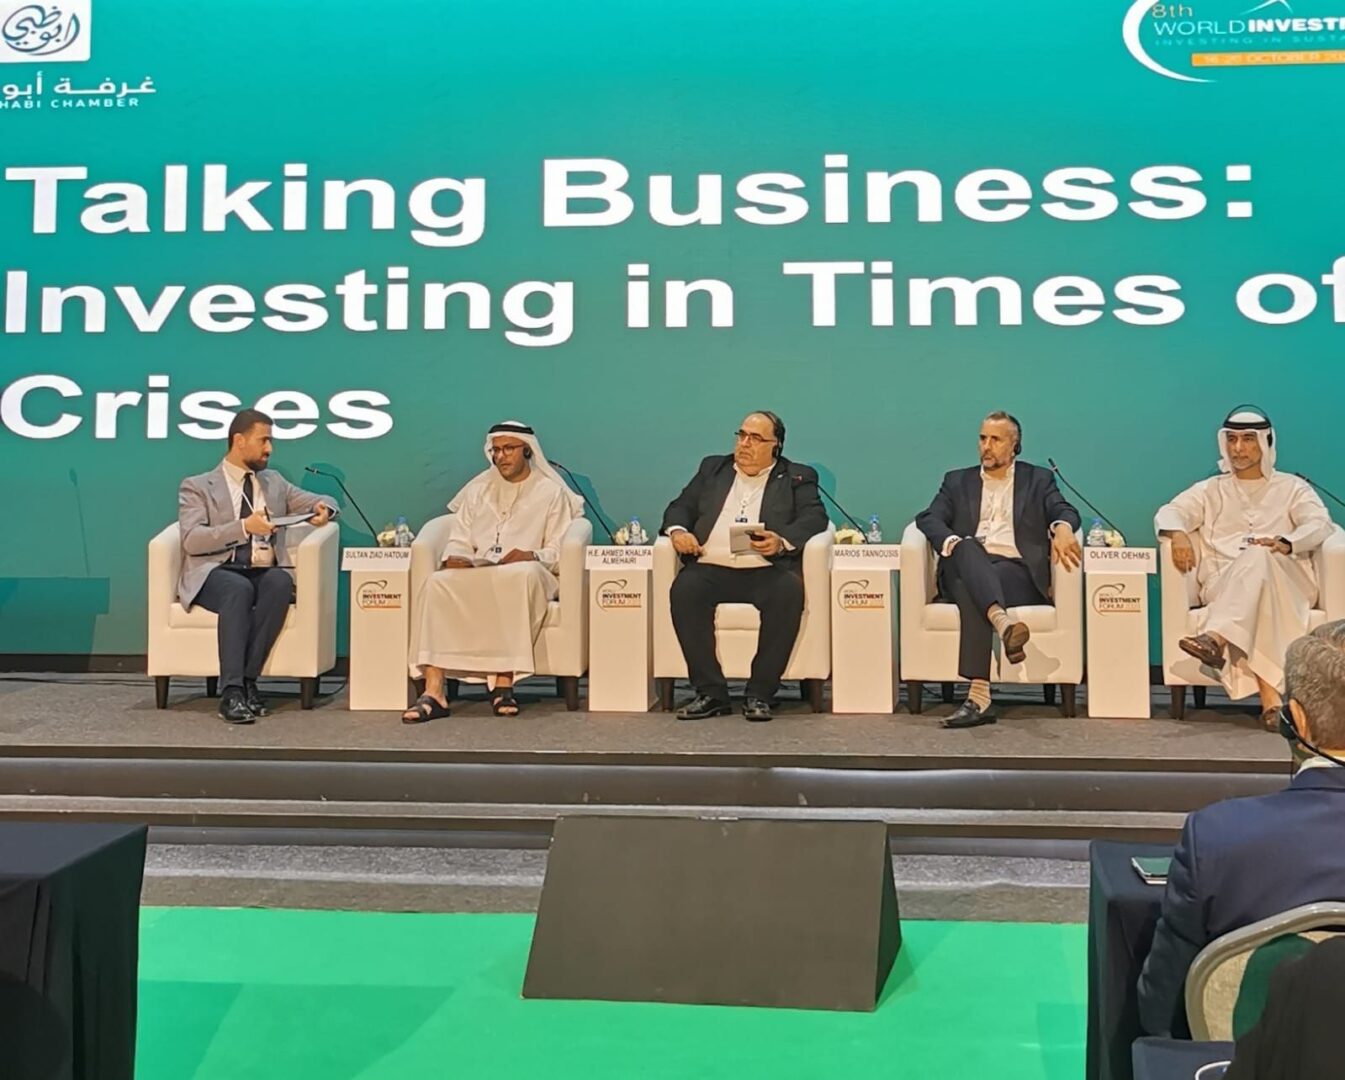 Marios Tannousis speaks at the World Investment Forum in Abu Dhabi